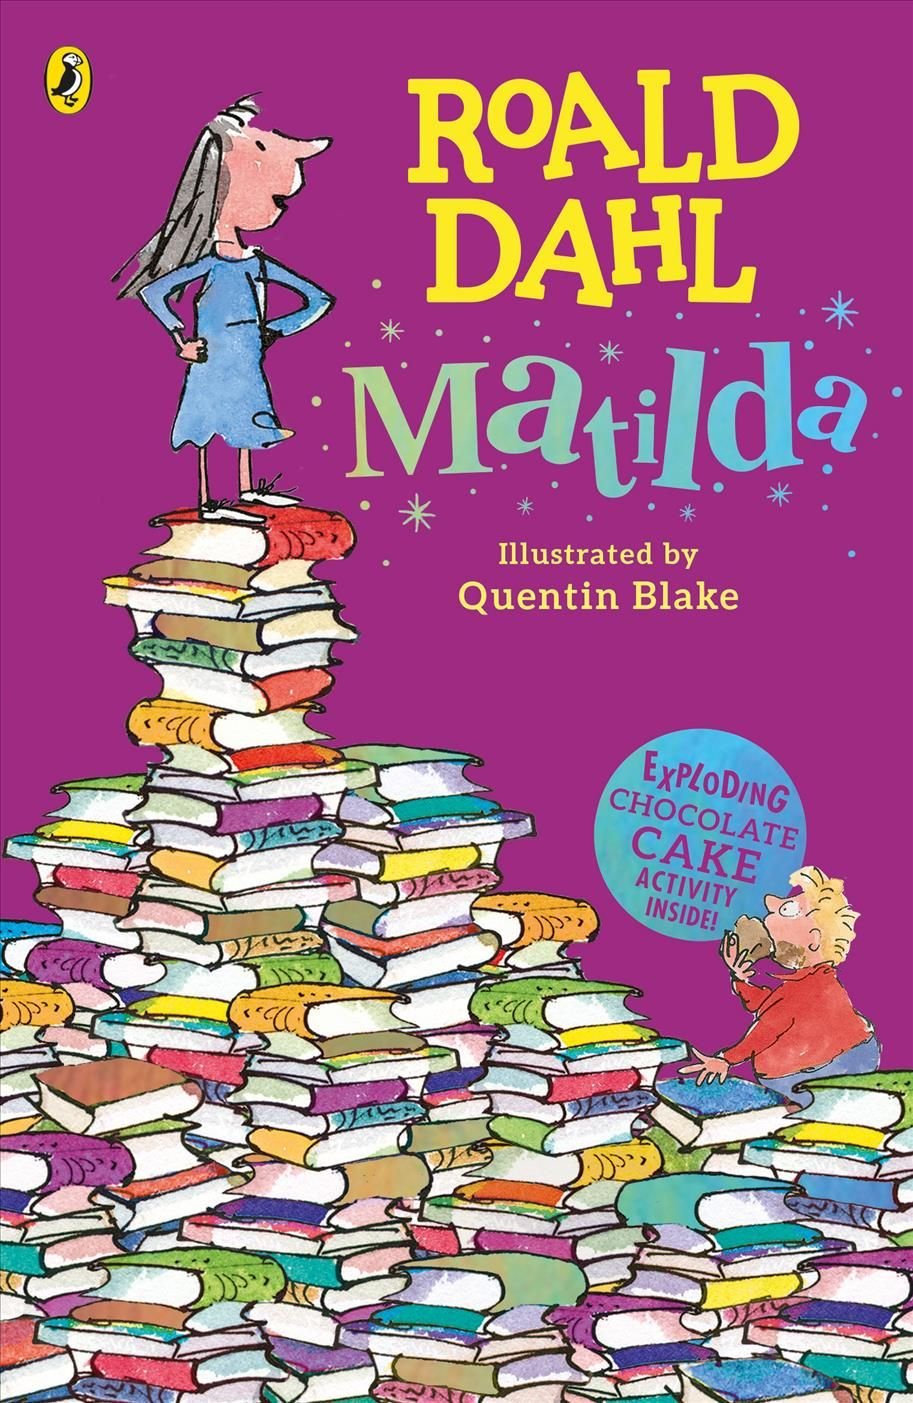 Buy Matilda by Roald Dahl With Free Delivery | wordery.com